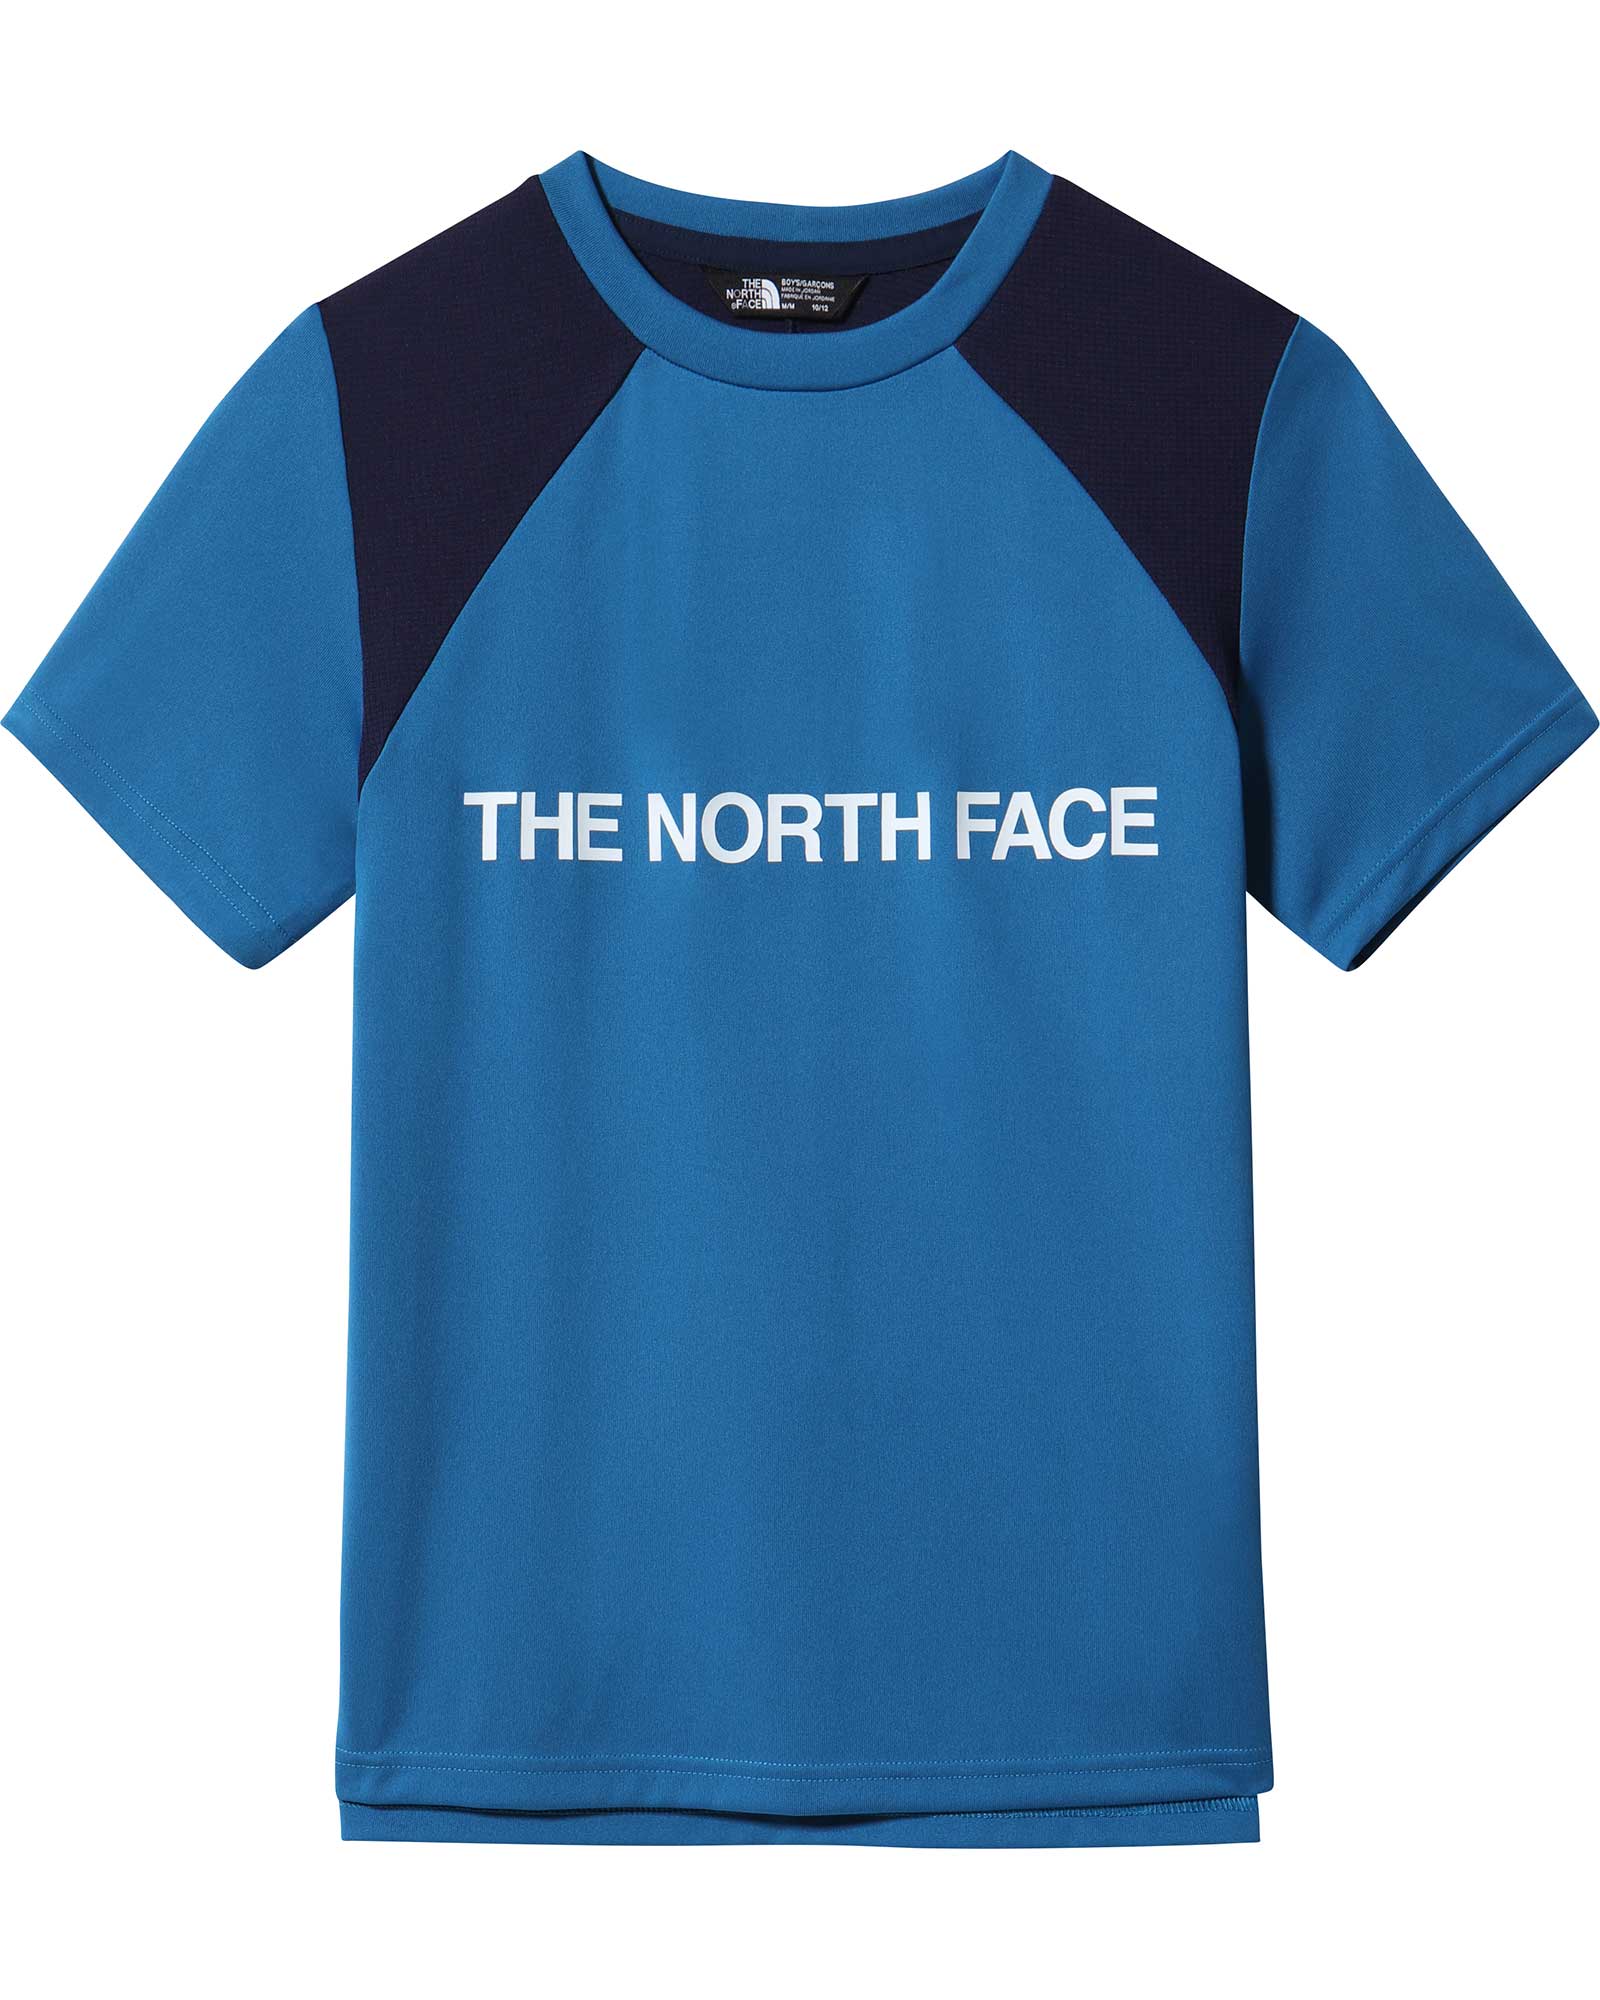 The North Face Never Stop Boys’ T Shirt - Banff Blue S